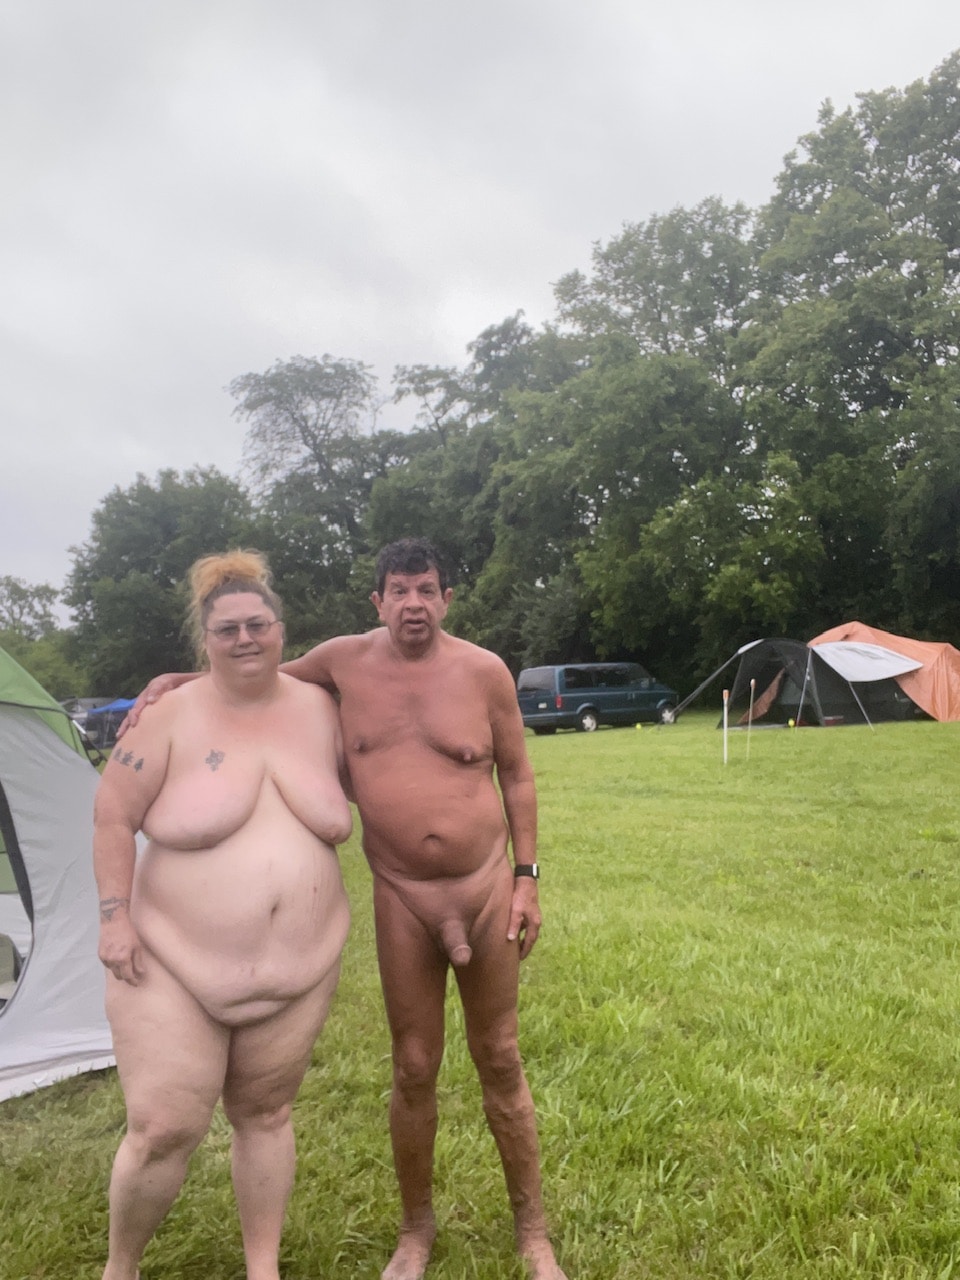 meaty milf nudes - We love camping in the nude - Real Amateurs